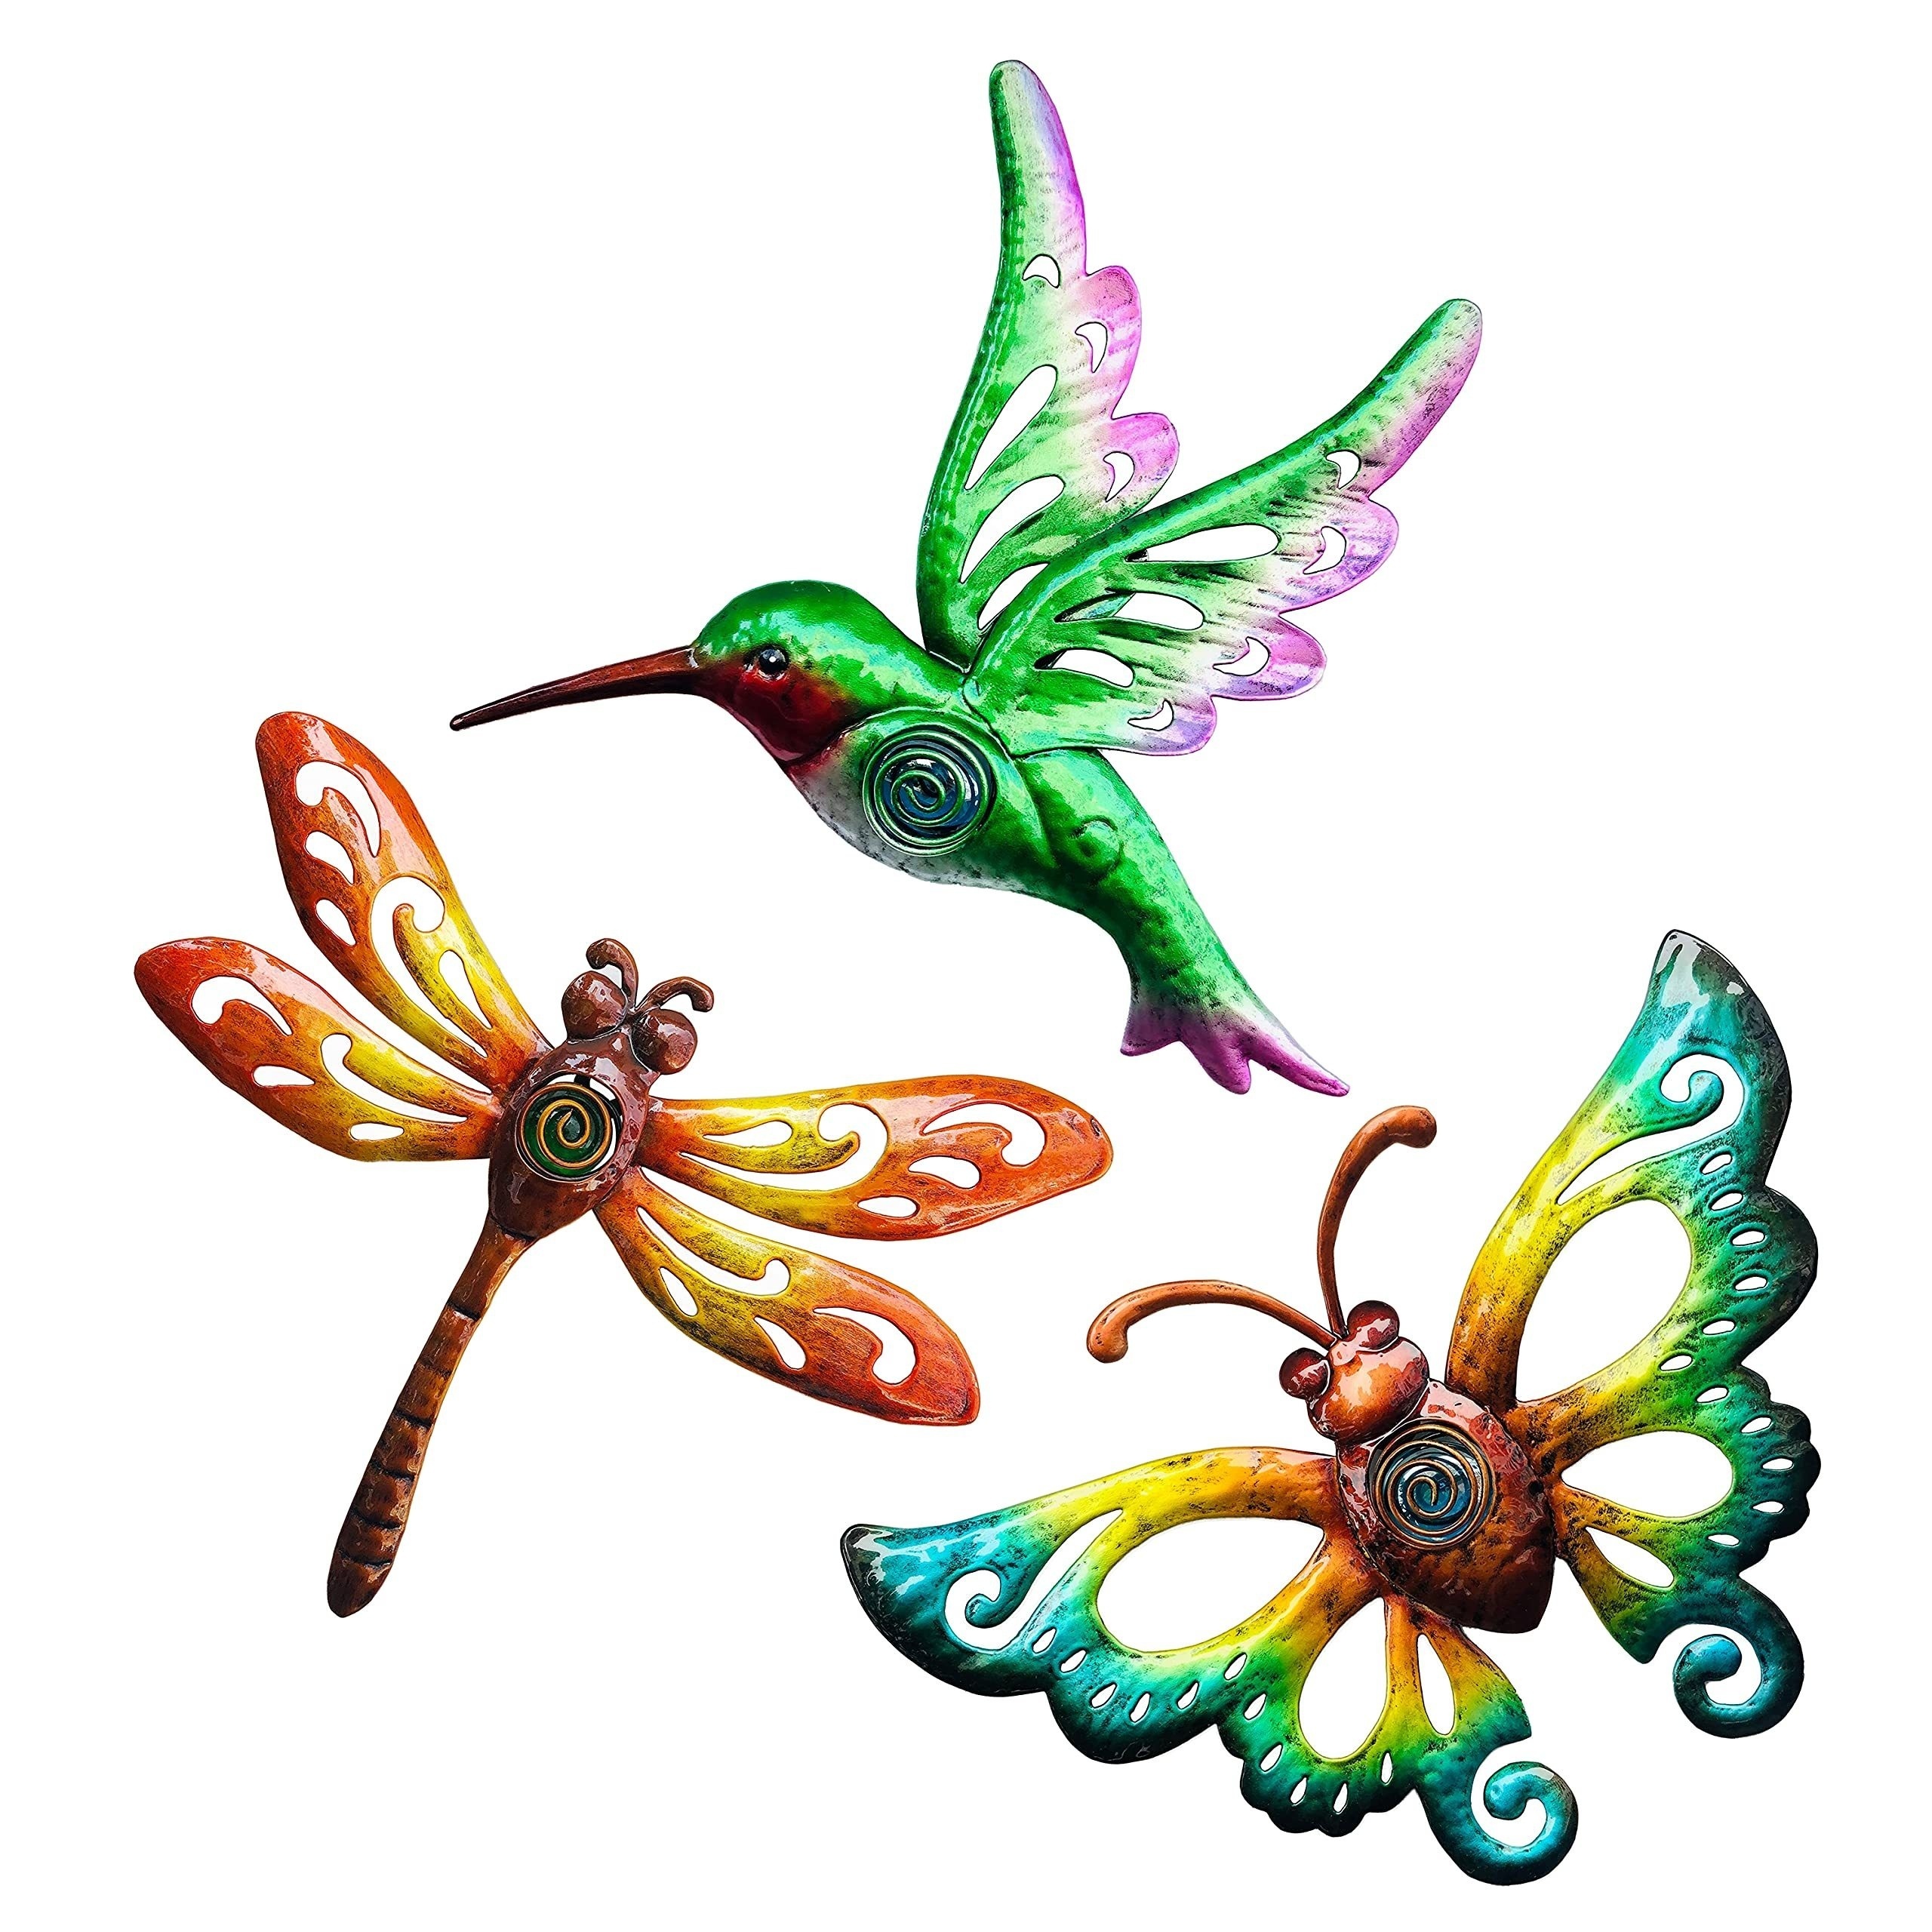 

3pcs Hummingbird Butterfly Dragonfly Metal Wall Art Decor, Wall Sculpture Decoration Hanging For Home Living Room Bedroom Garden Porch Patio Balcony Ornament For Indoor Outdoor